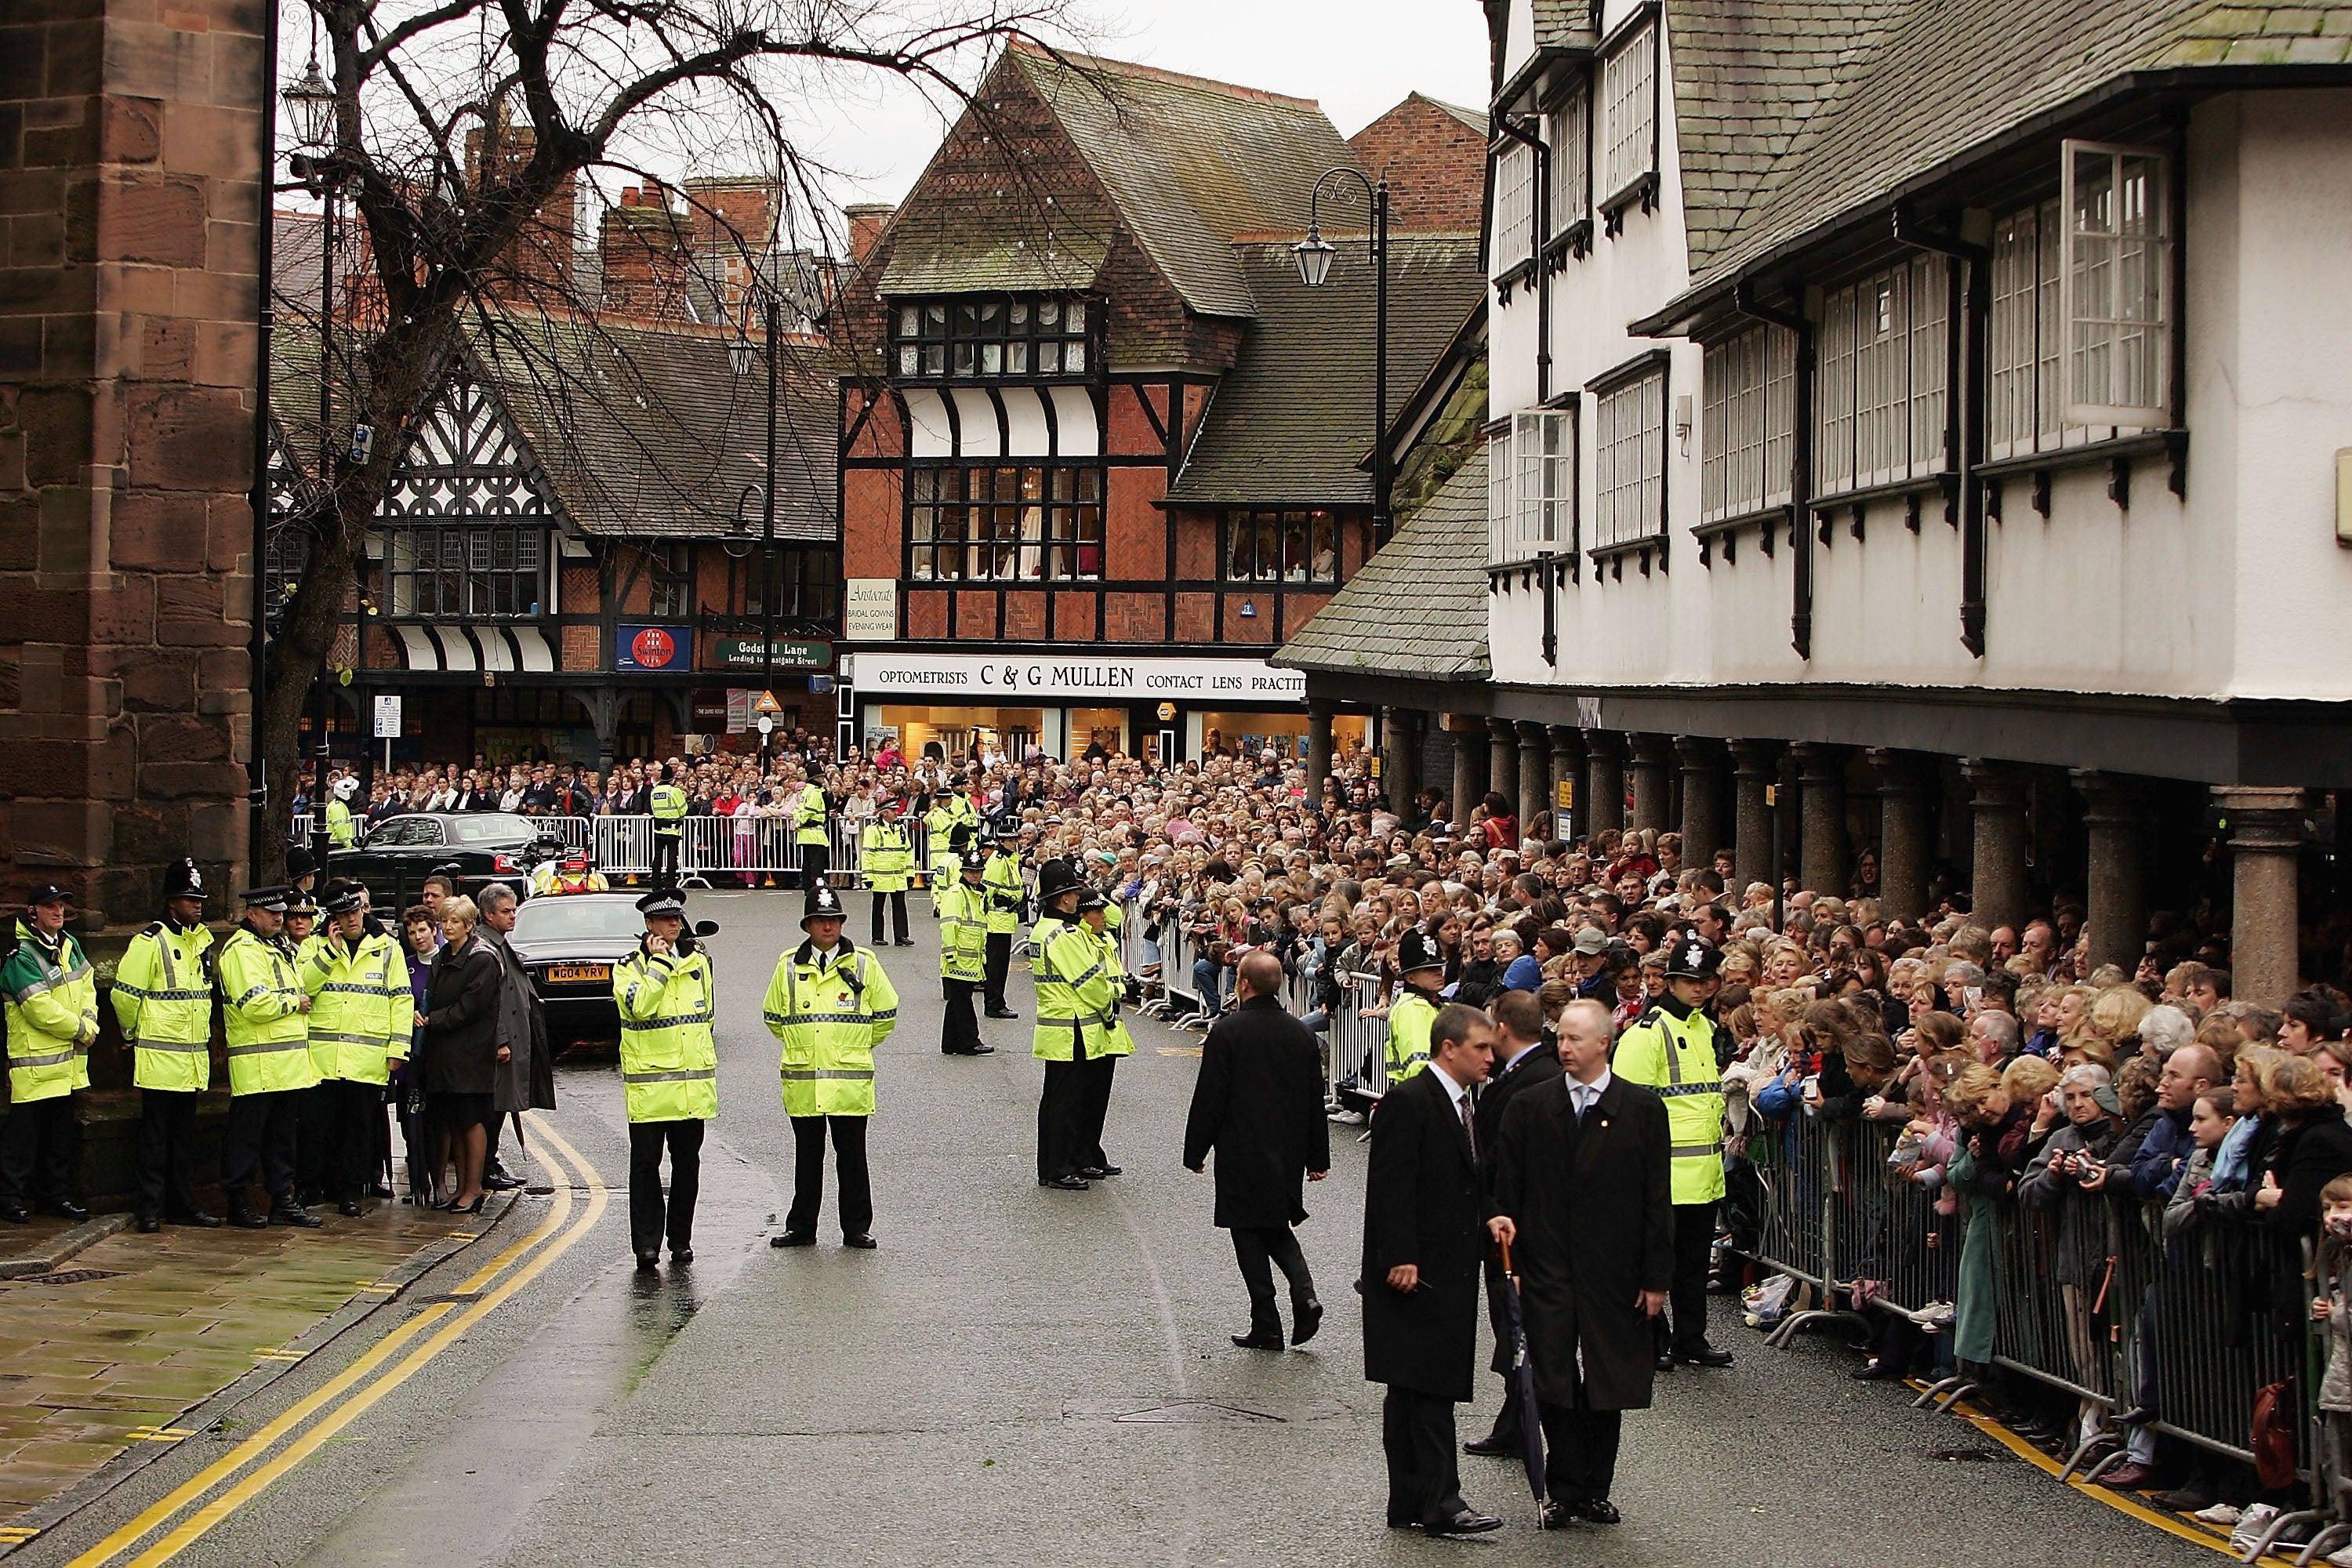 A large police presence is expected in Chester for the wedding